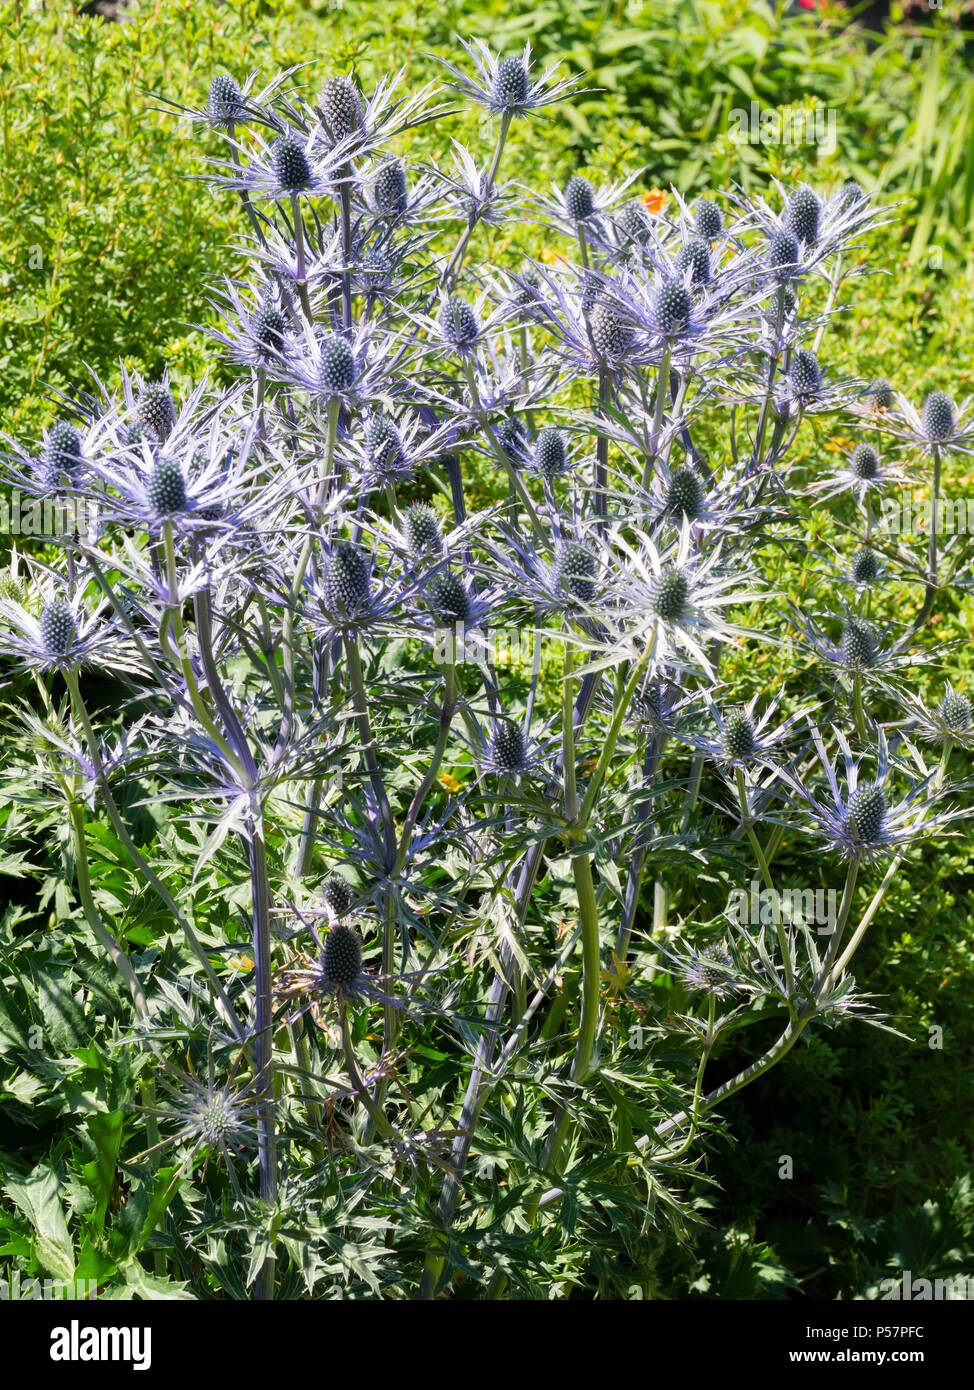 Spiky foliage and blue flower heads of the early summer flowering sea holly, Eryngium x zabelii 'Forncett Ultra' Stock Photo